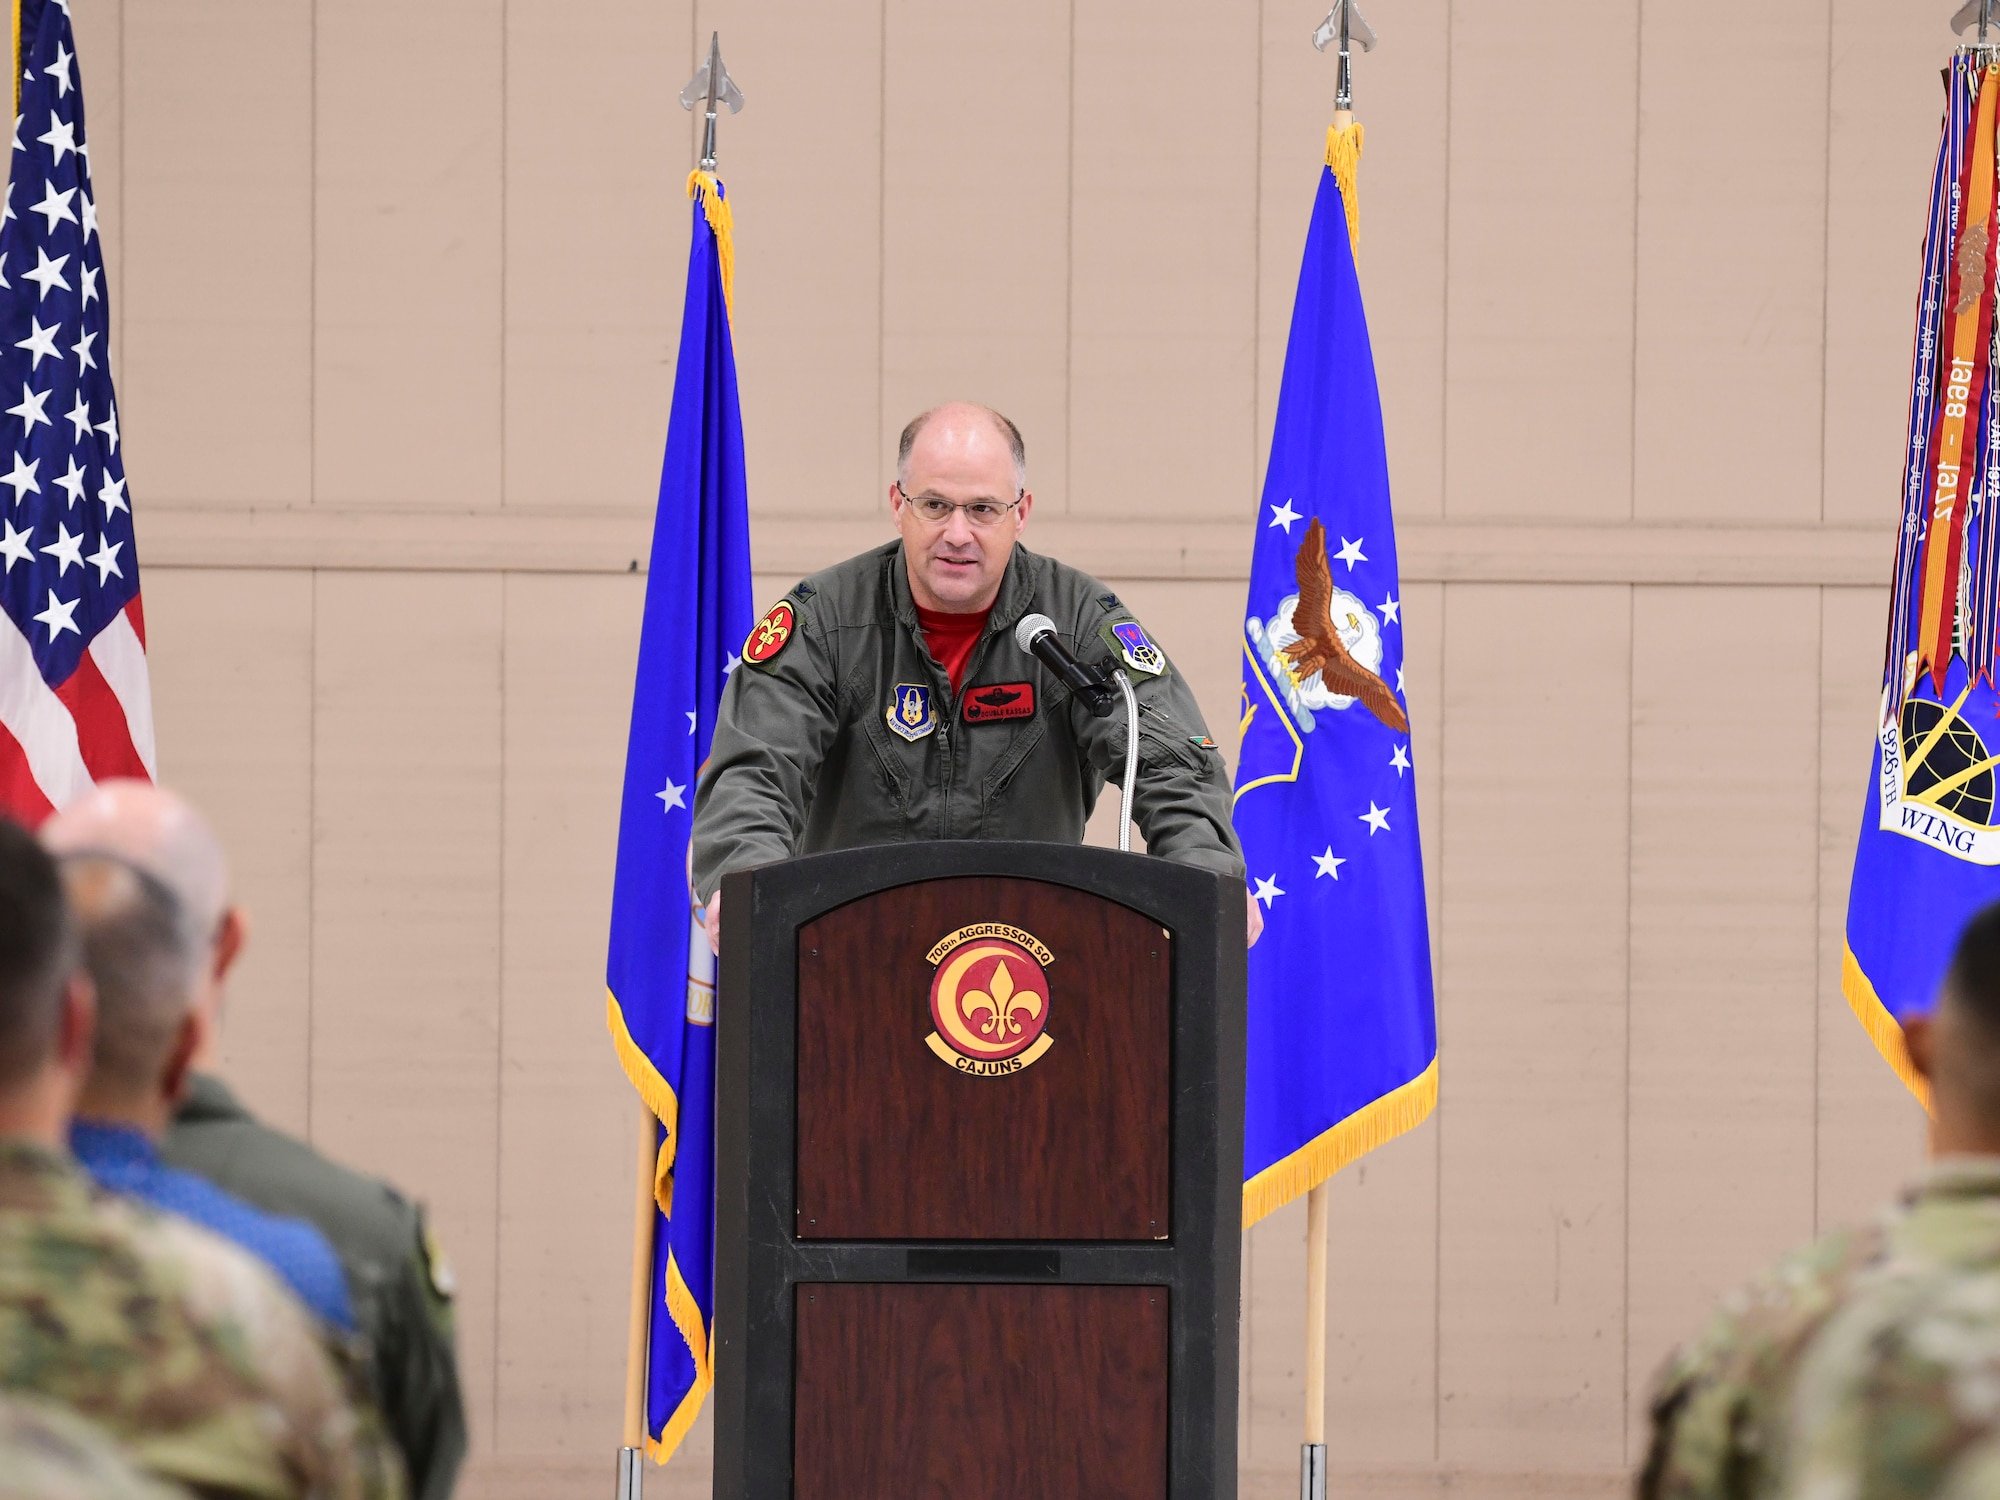 Col. Sean Rassas speaks behind a podium during a ceremony. The U.S. Air Force, 10th Air Force, and U.S. flags are behind him.